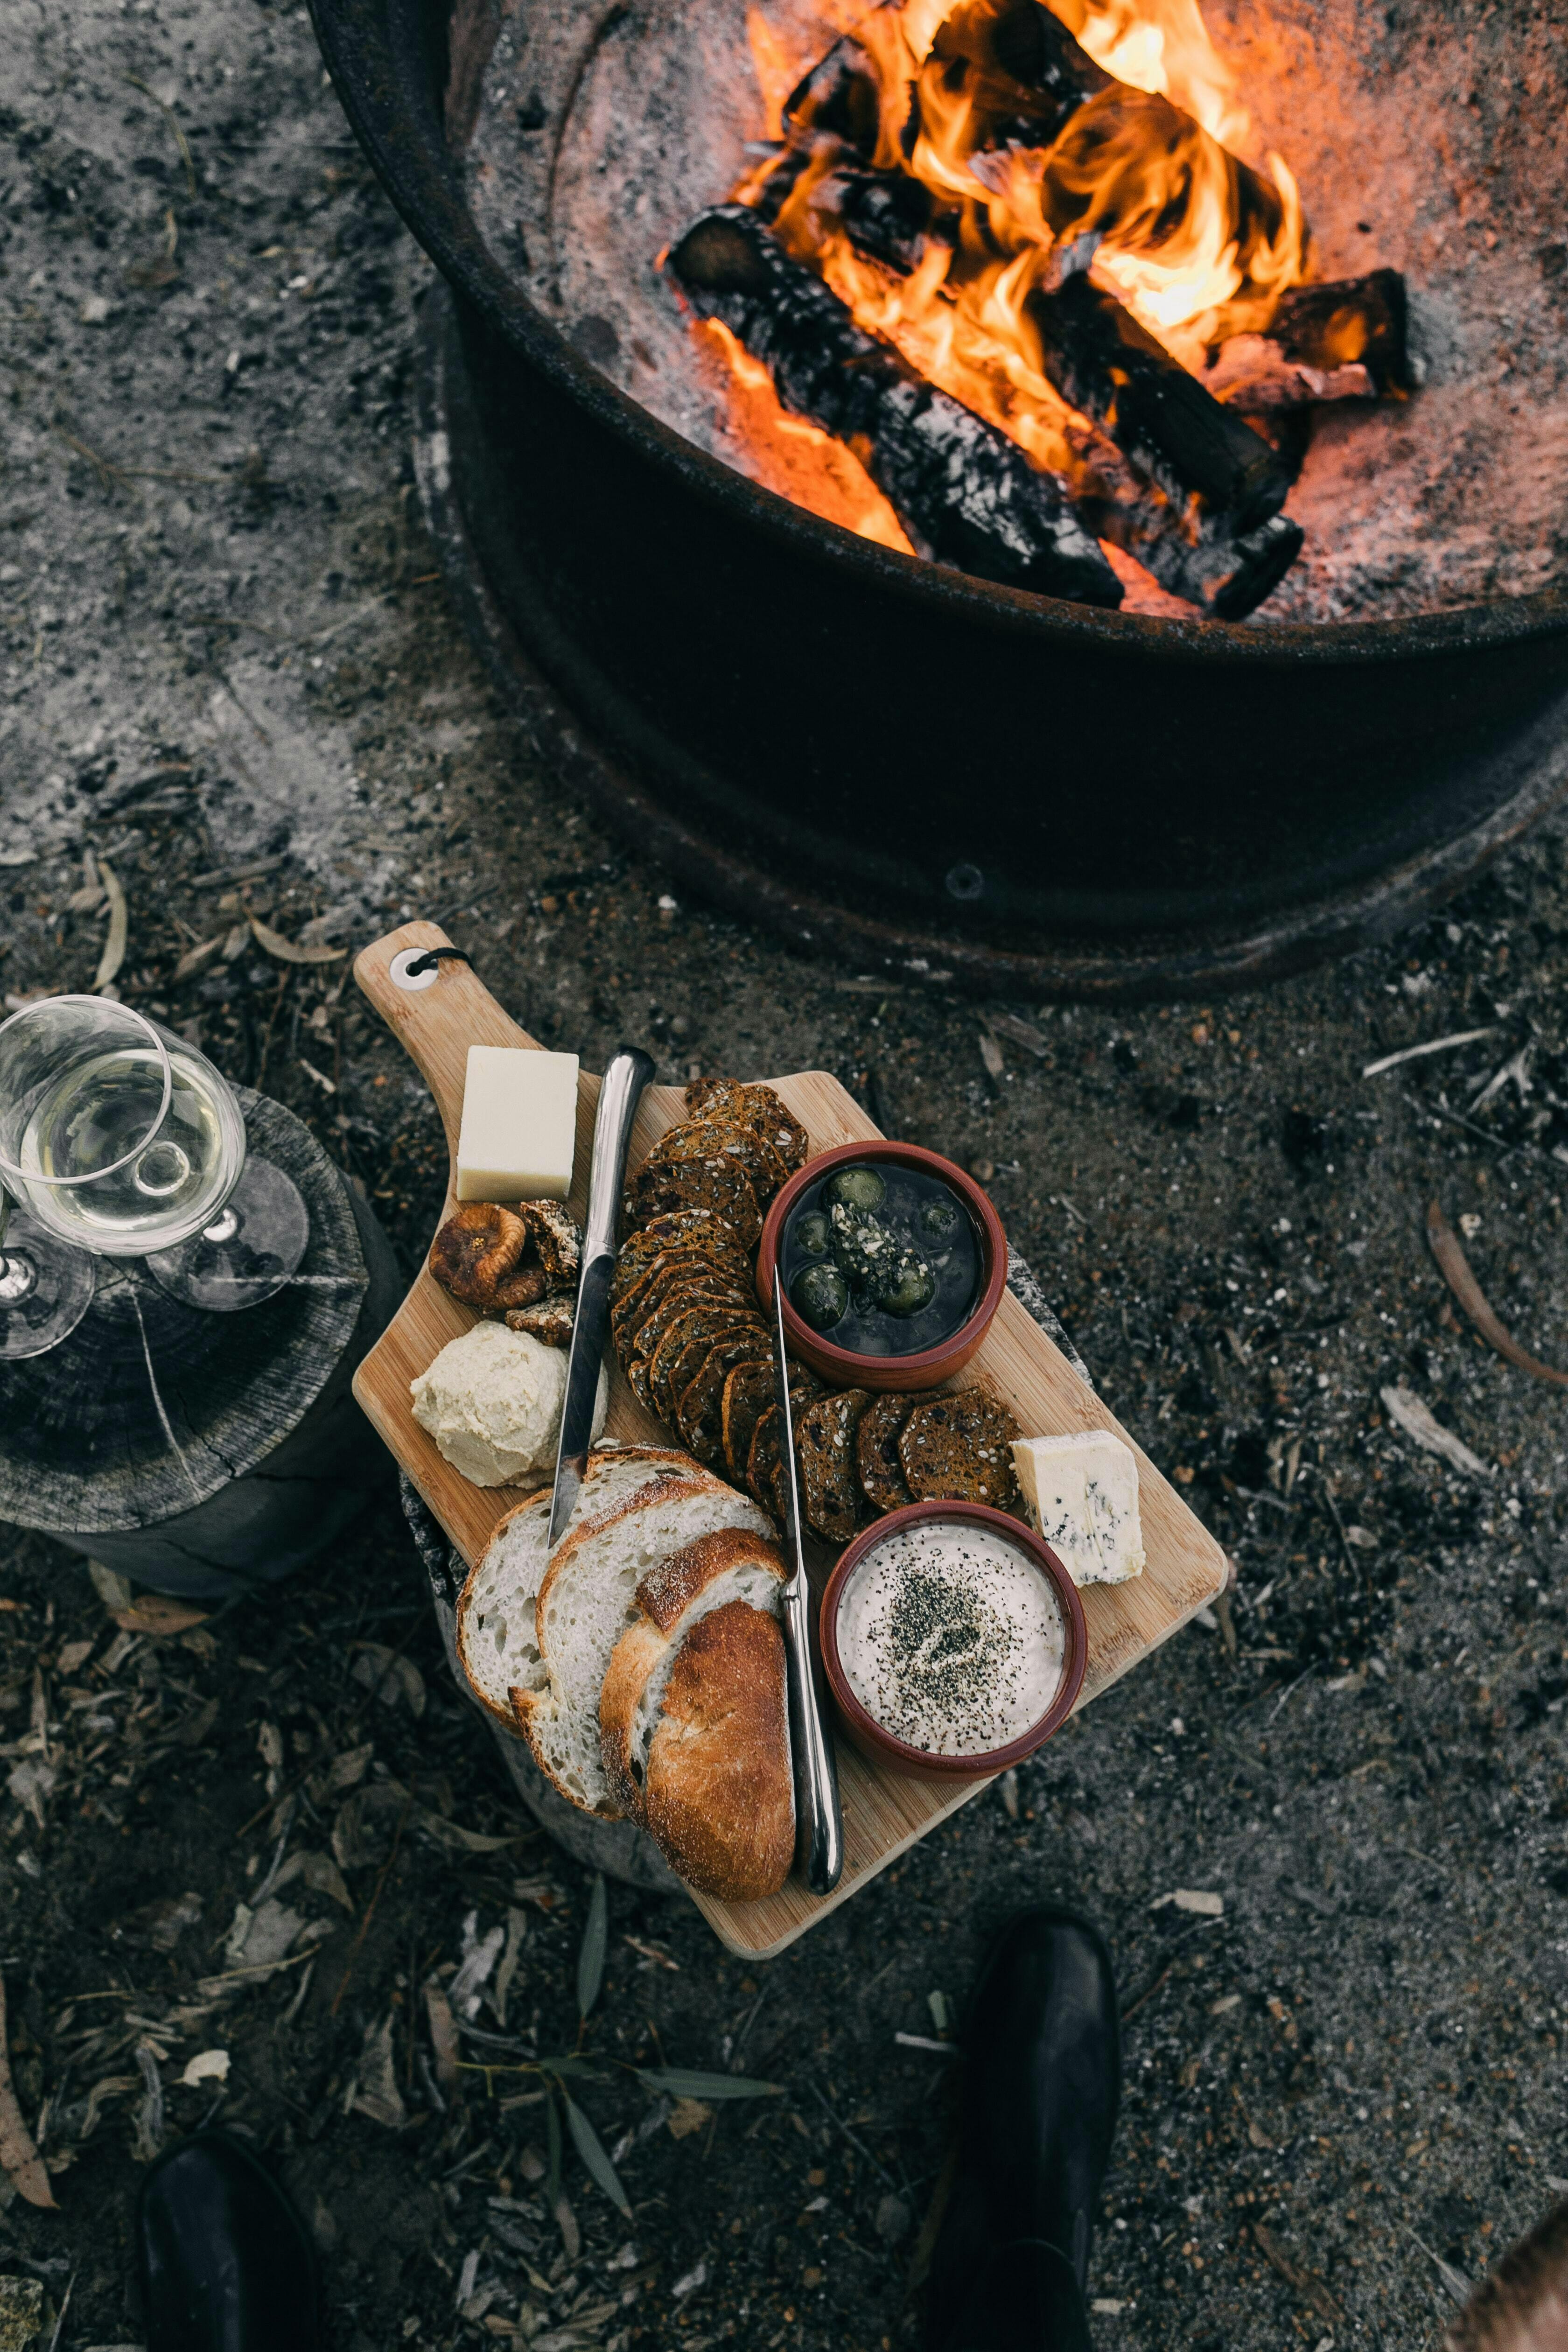 A charcuterie board sits near a fire pit. There are a few glasses of wine on the side and bread, olives, cheese, and hummus on the board.